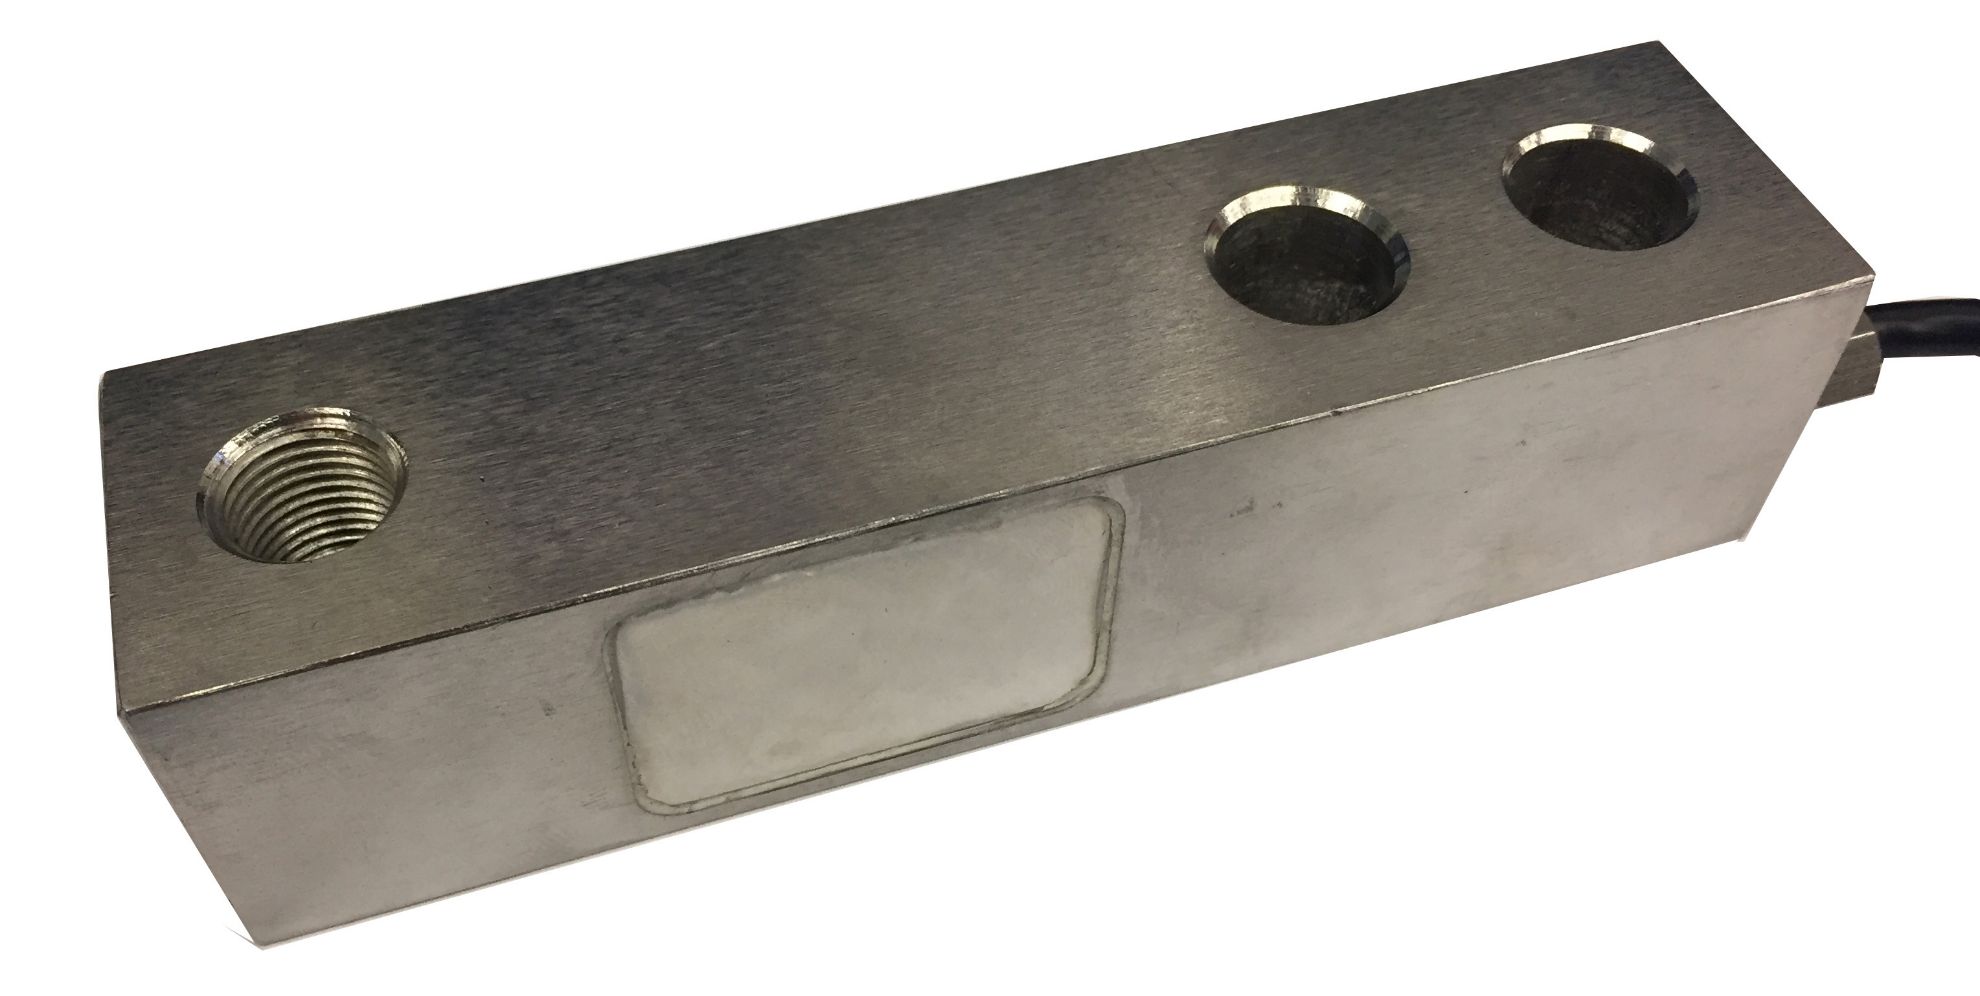 HISB01 - Stainless Steel Shear Beam Load Cell